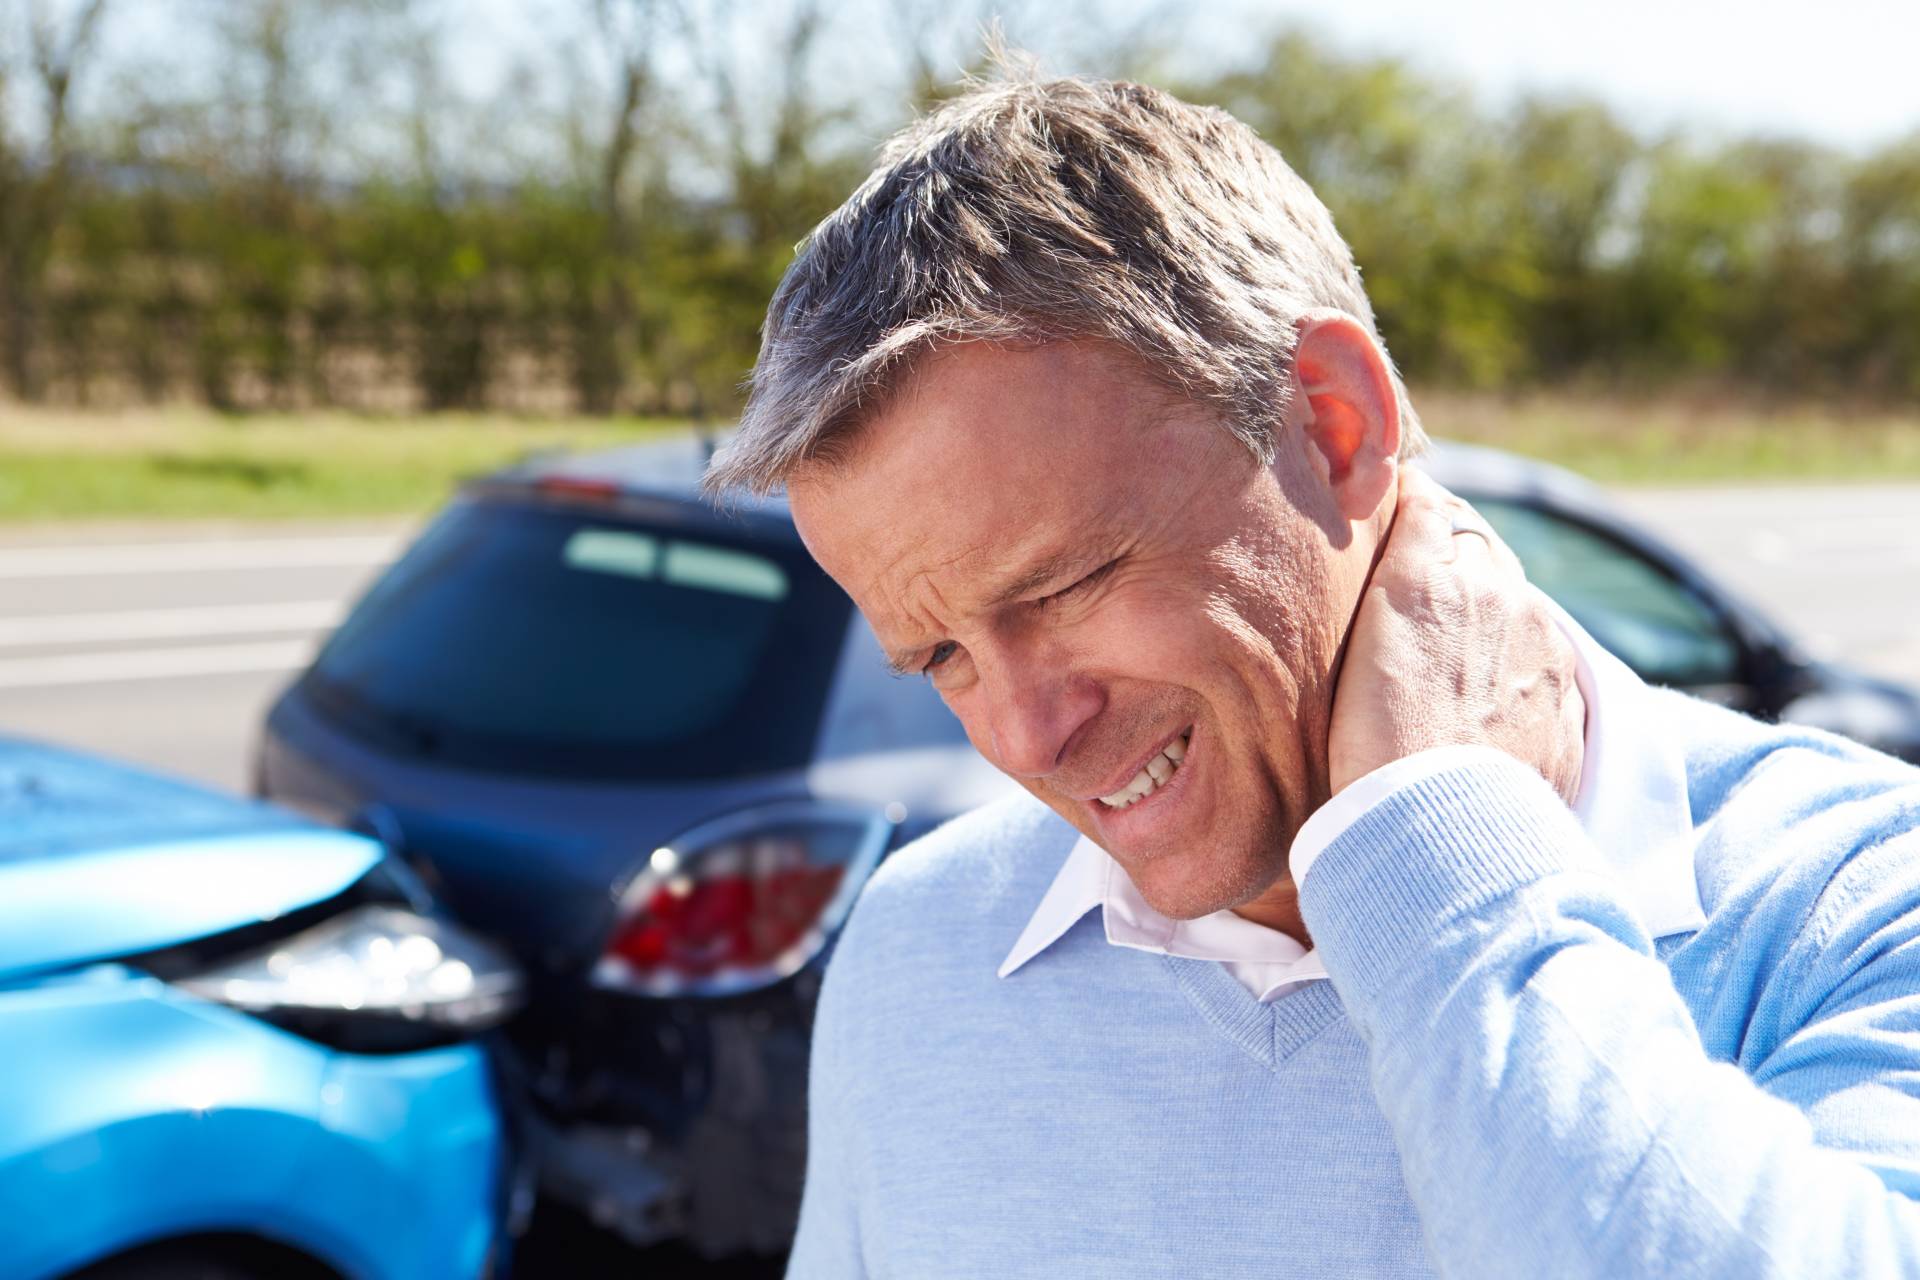 Injured in an auto accident? Visit an Angell Law Firm Personal Injury Lawyer for a free consultation.